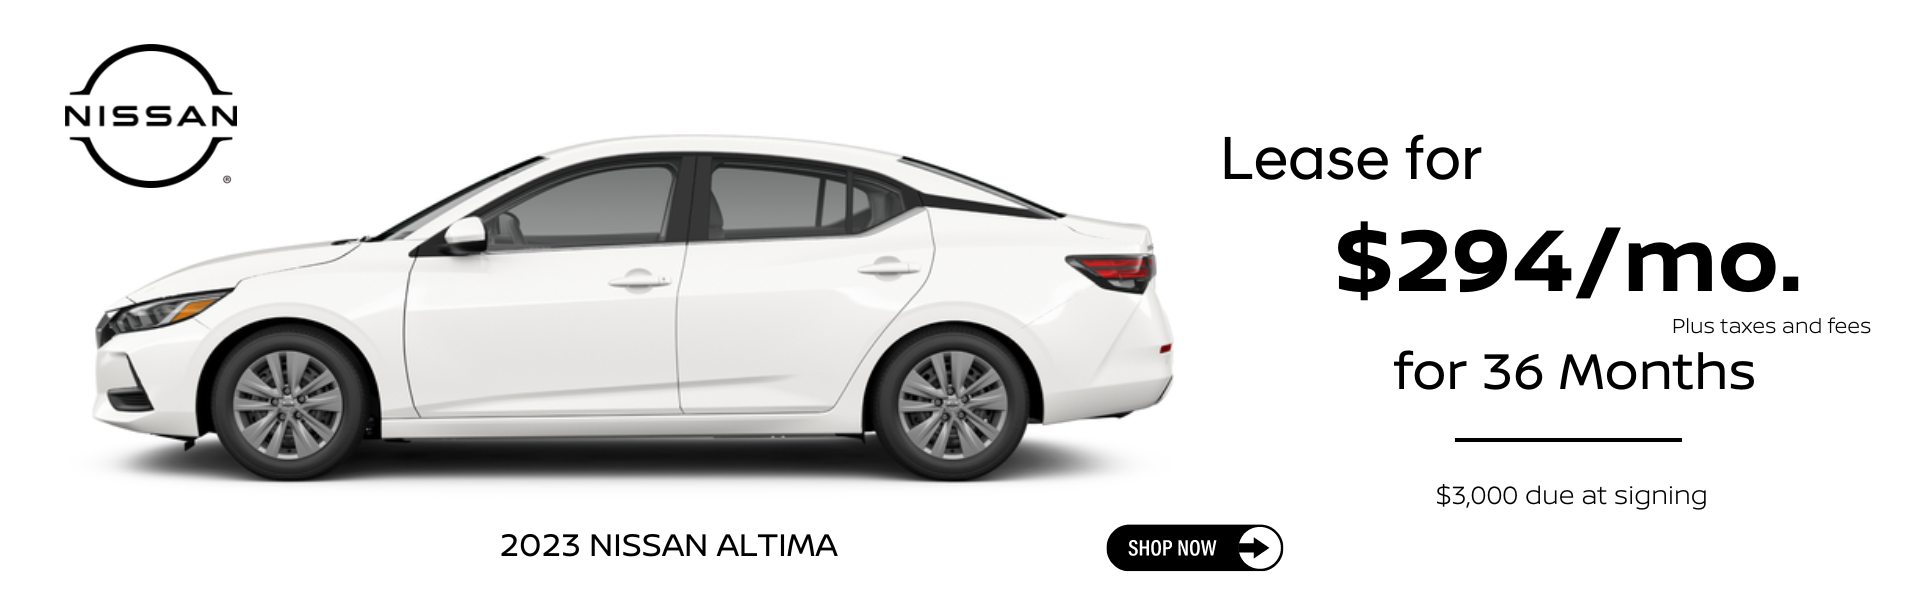 2023 Nissan Altima March Lease Specials